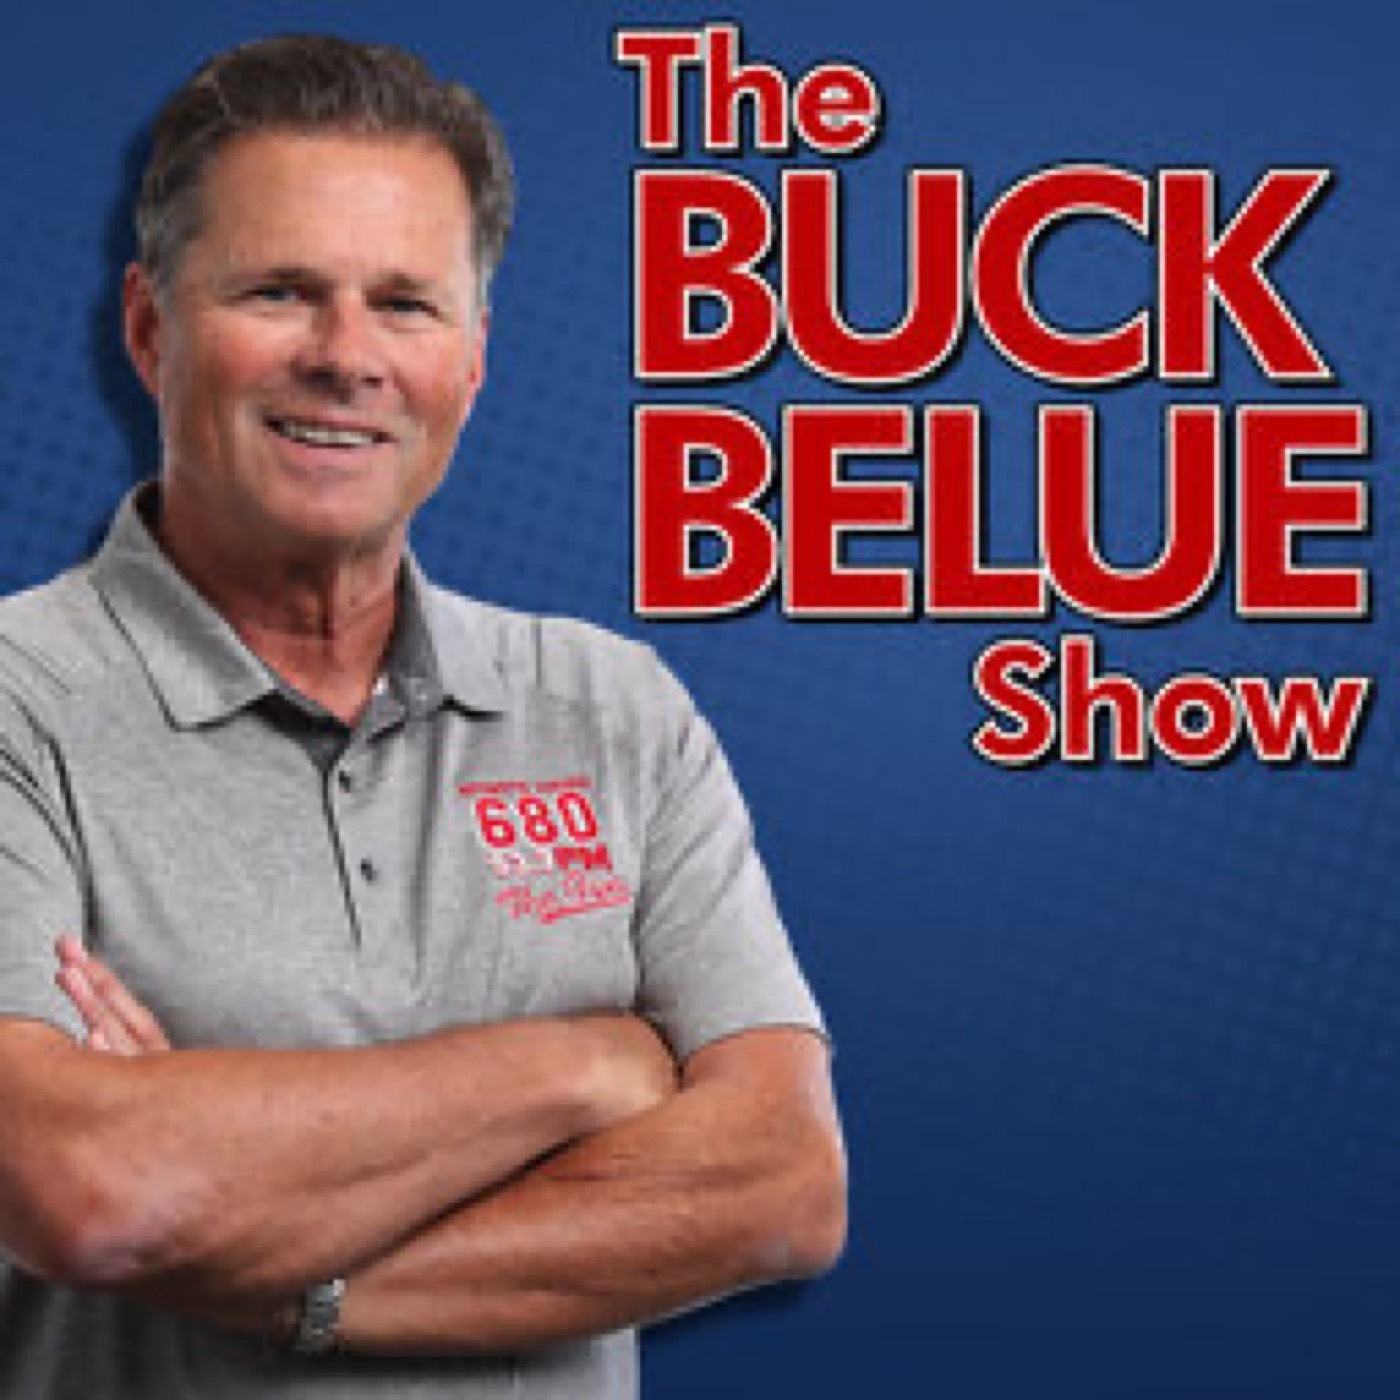 The Buck Belue Show - Tuesday, March 07, 2023